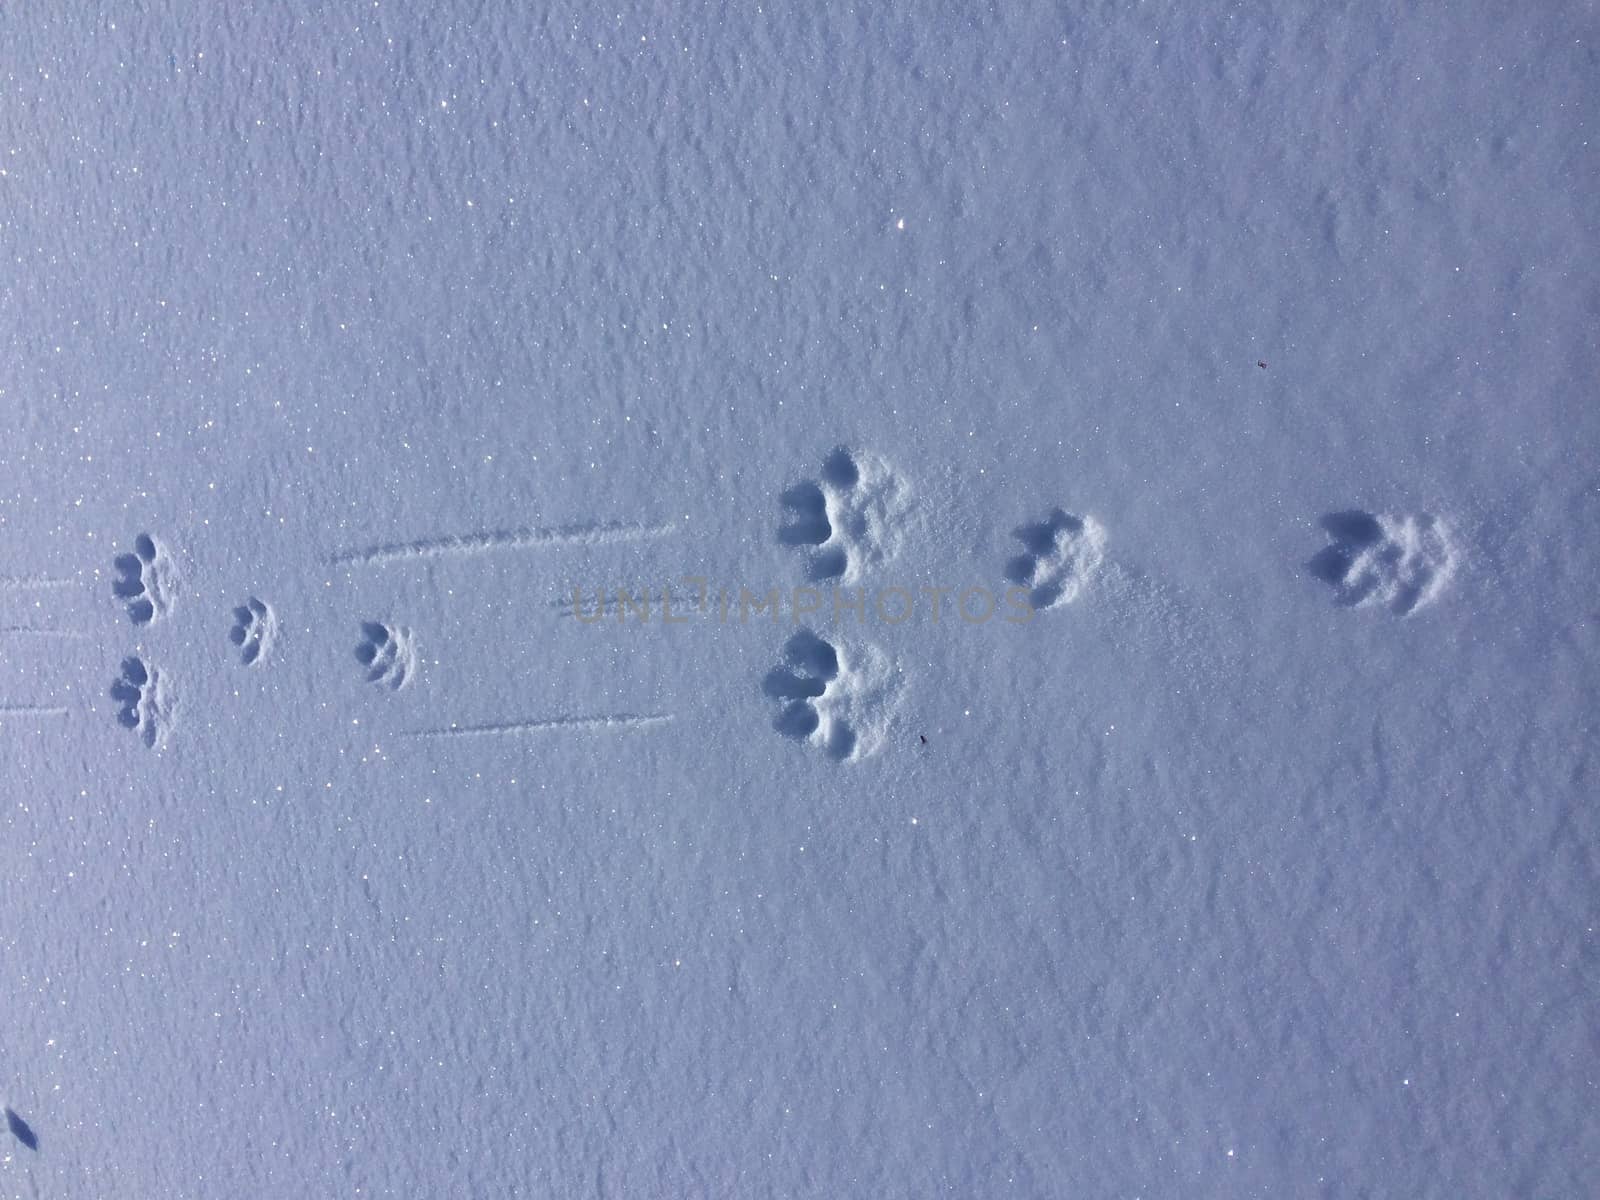 Tracks from a hare in the snow